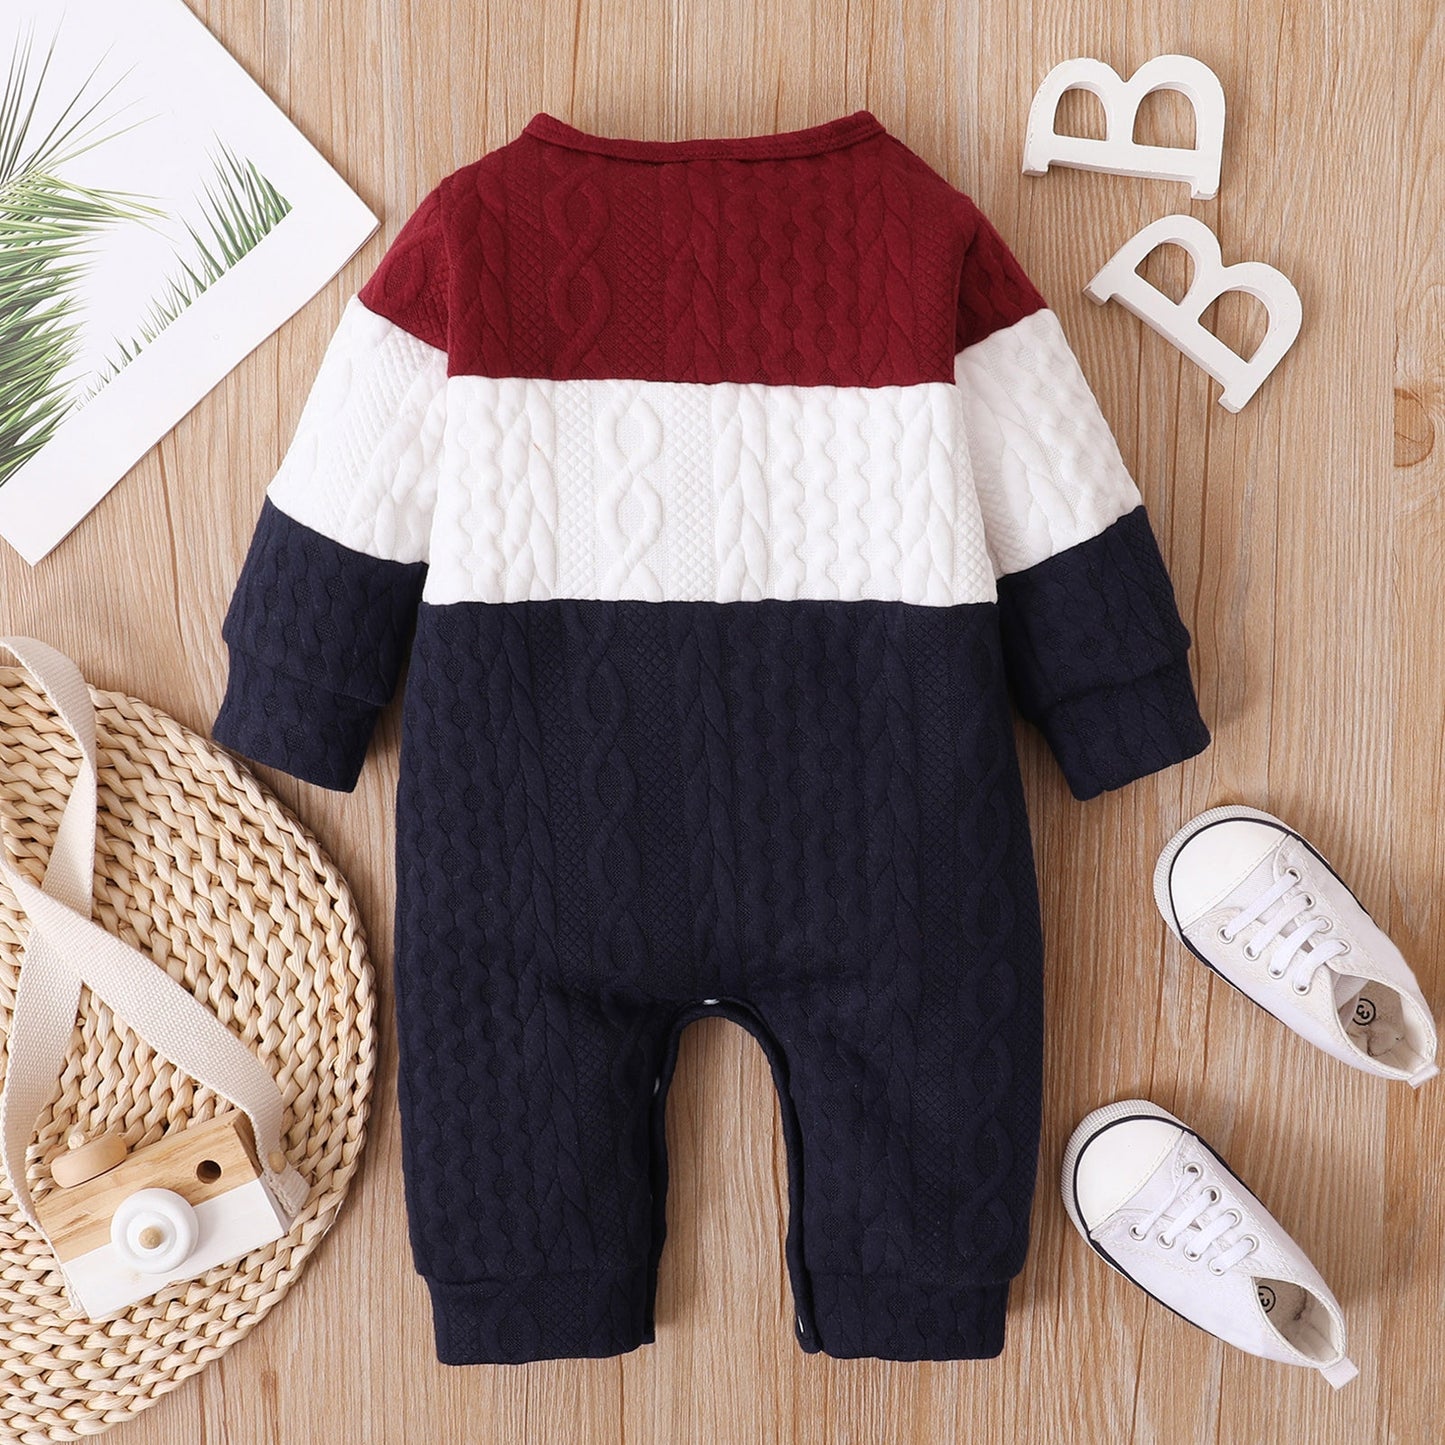 Infant Baby Boys Girls Cute Rompers  Winter  Long Sleeve Patchwork Color Romper Jumpsuit